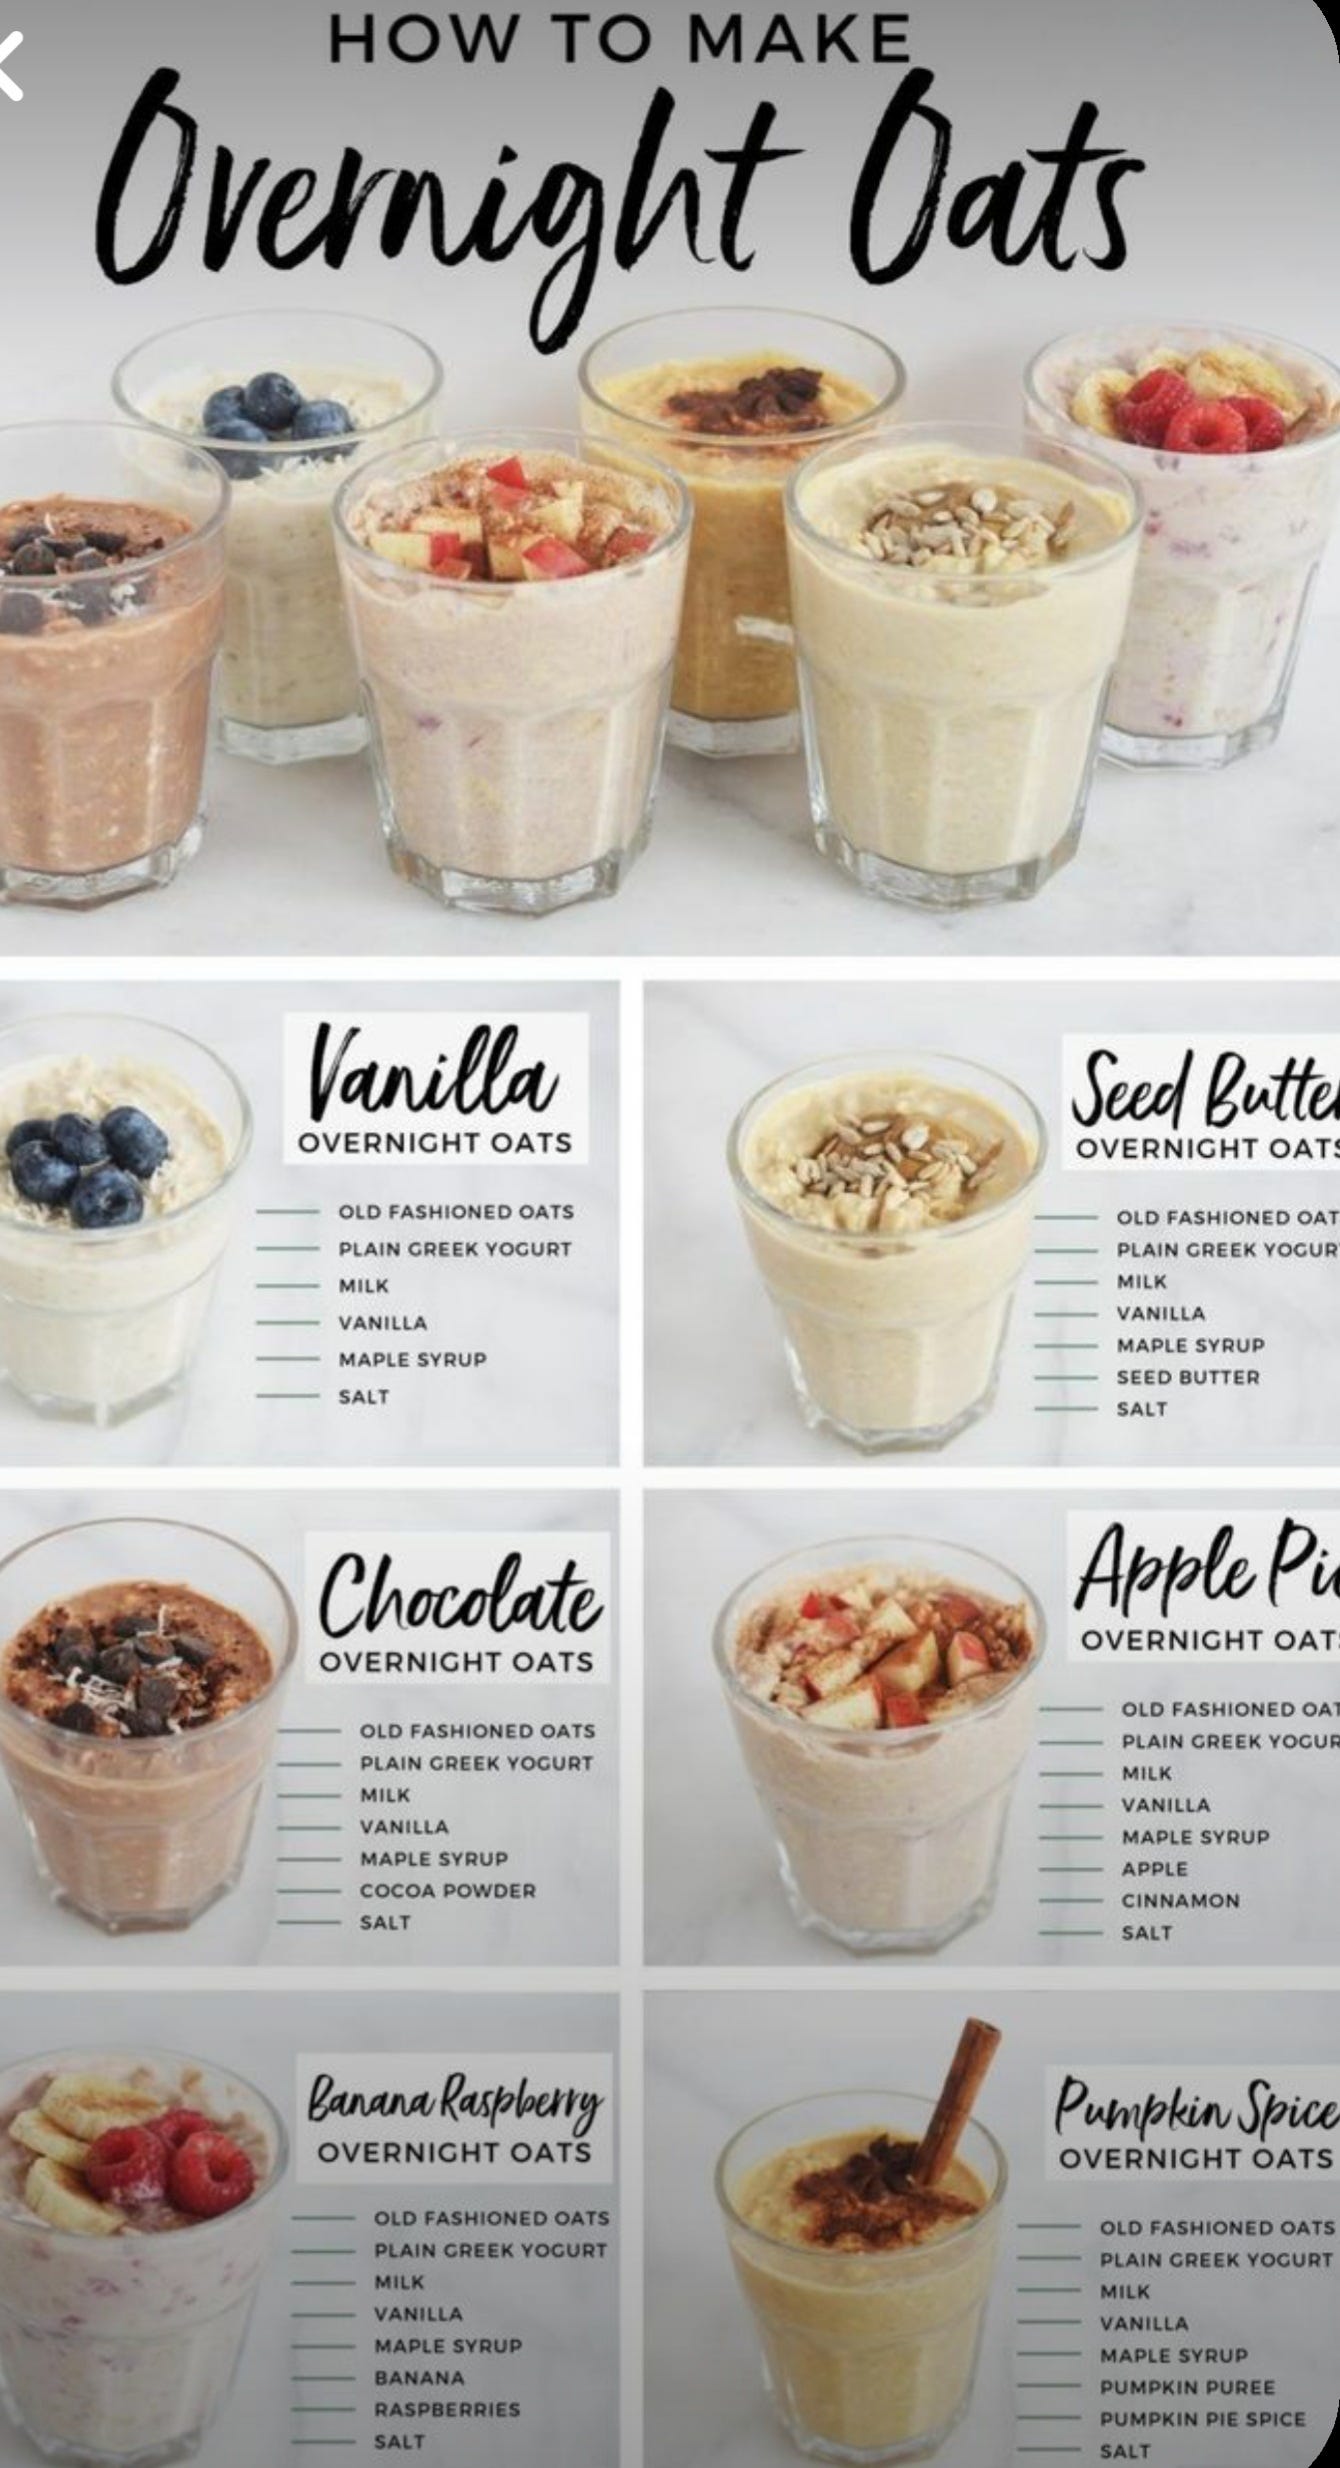 Healthy Overnight Oats (10+ Flavors!)